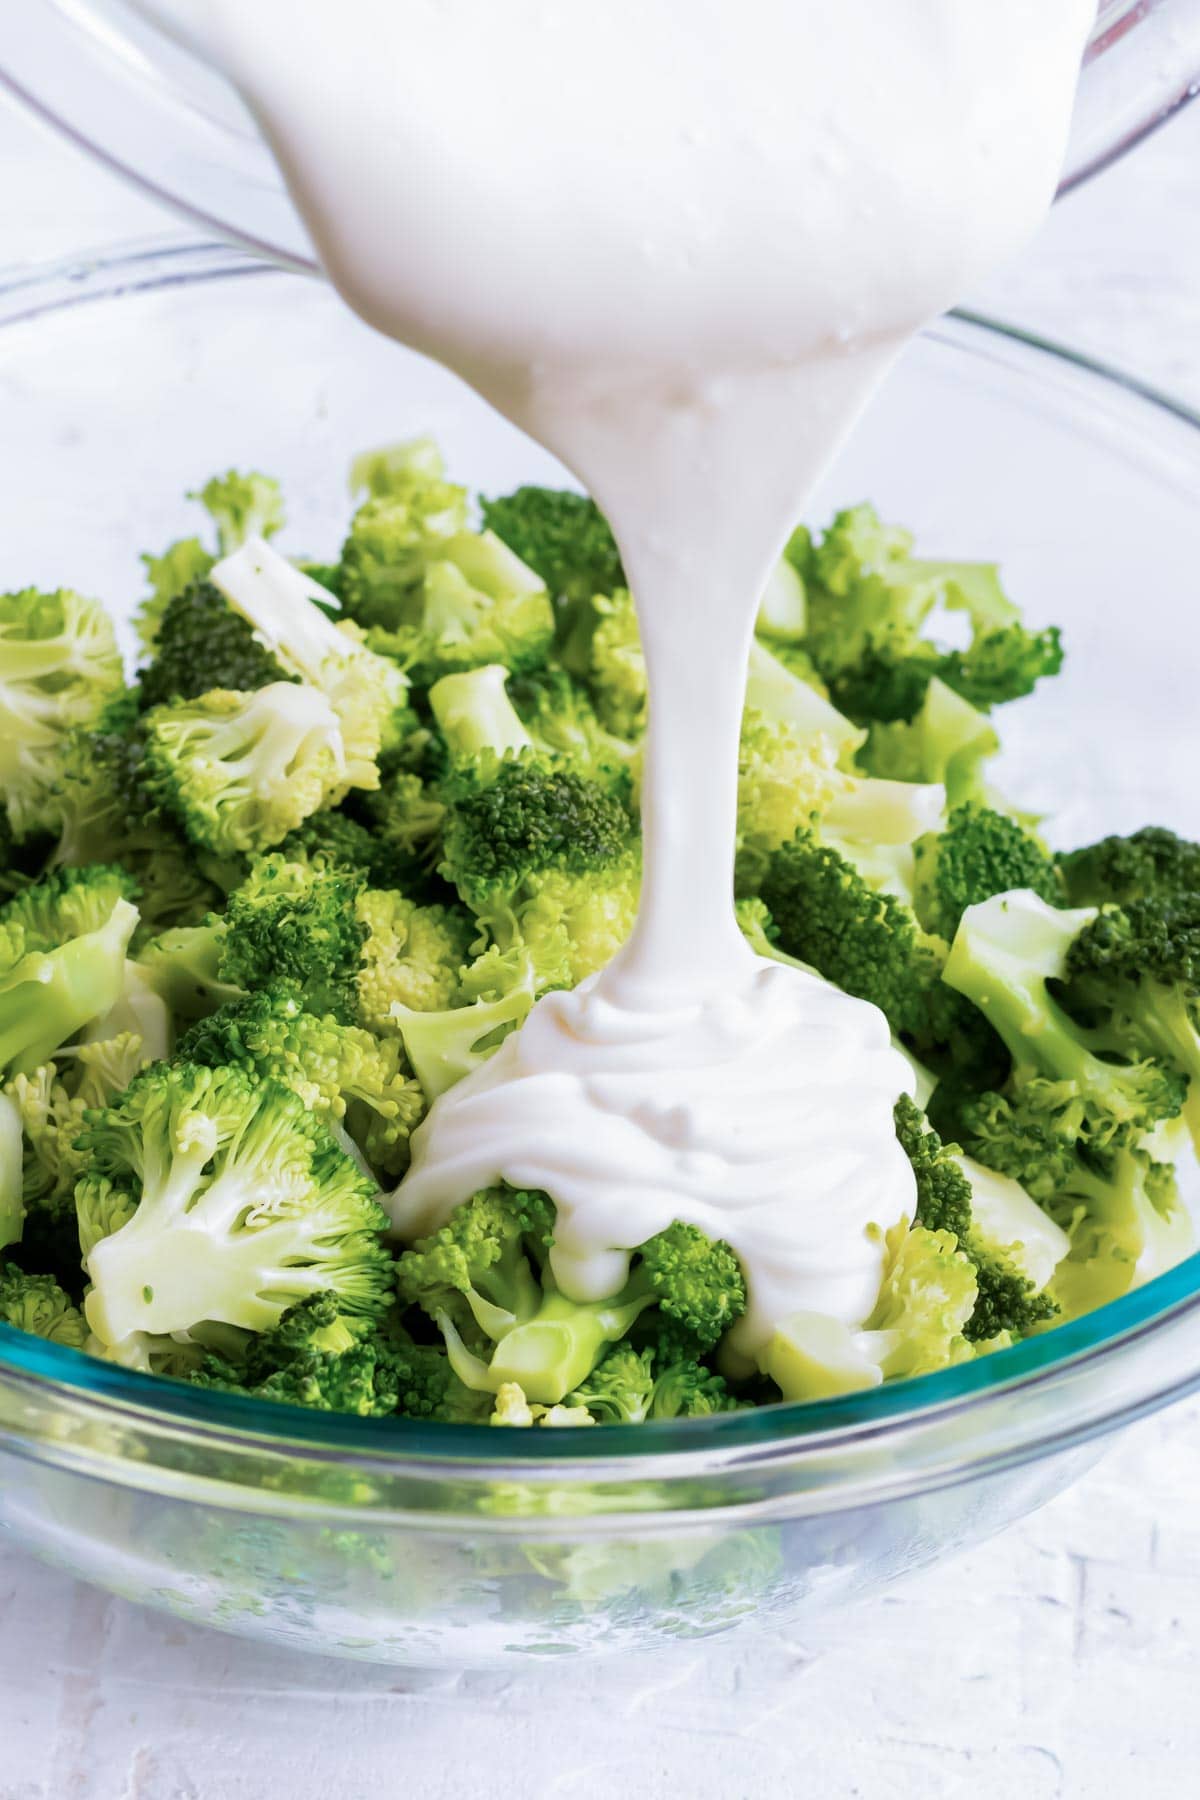 Pouring creamy dressing over cooked broccoli.